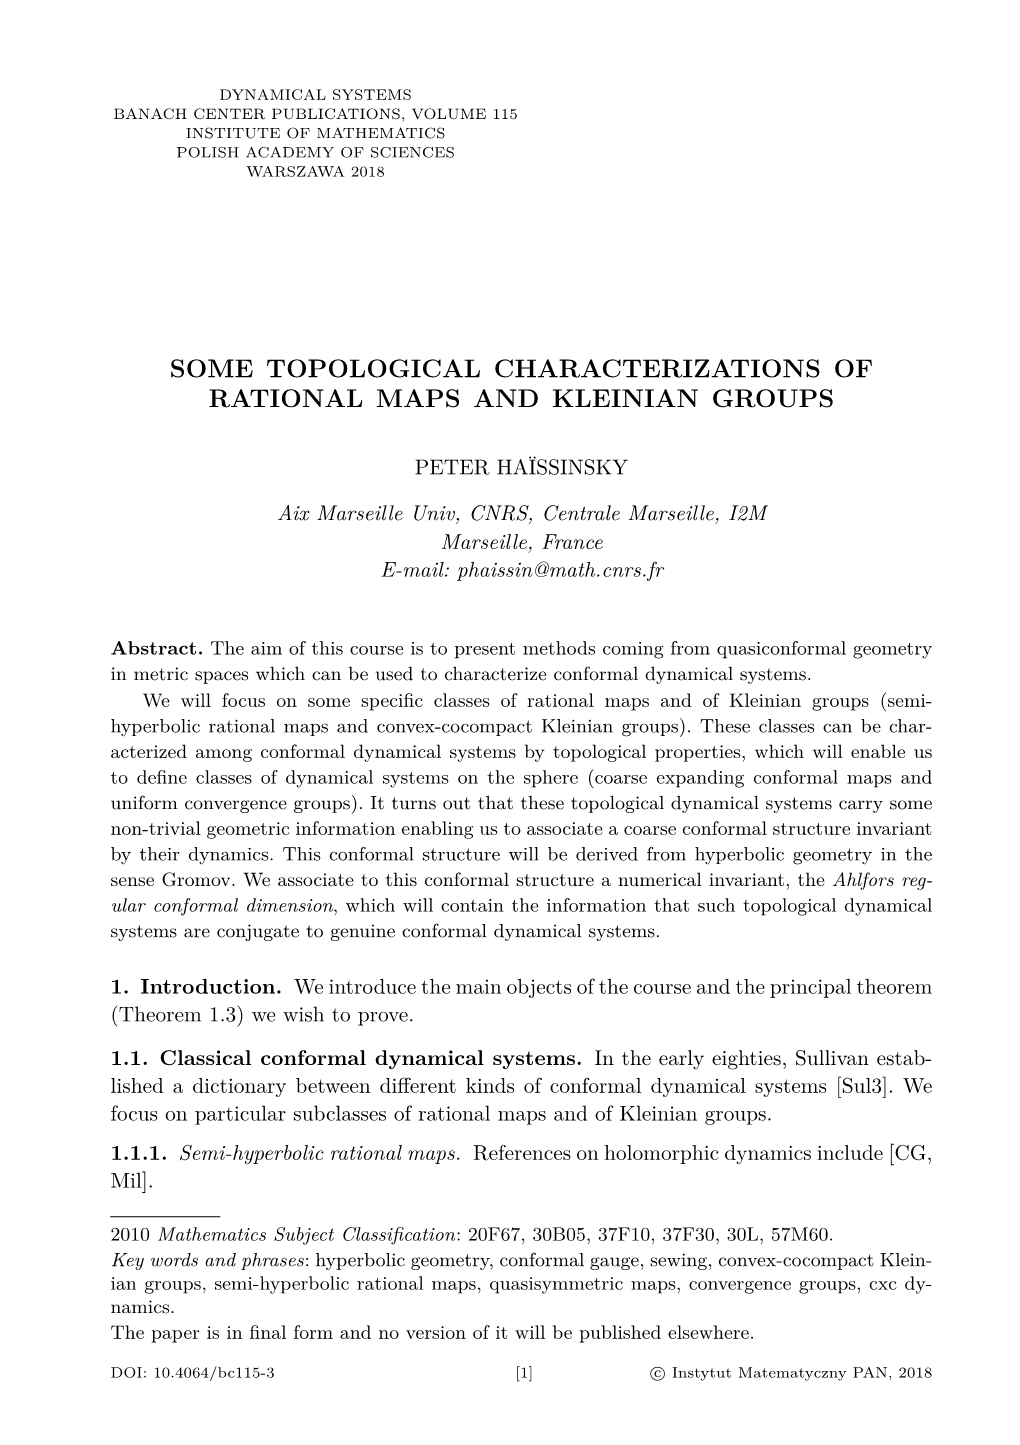 Some Topological Characterizations of Rational Maps and Kleinian Groups